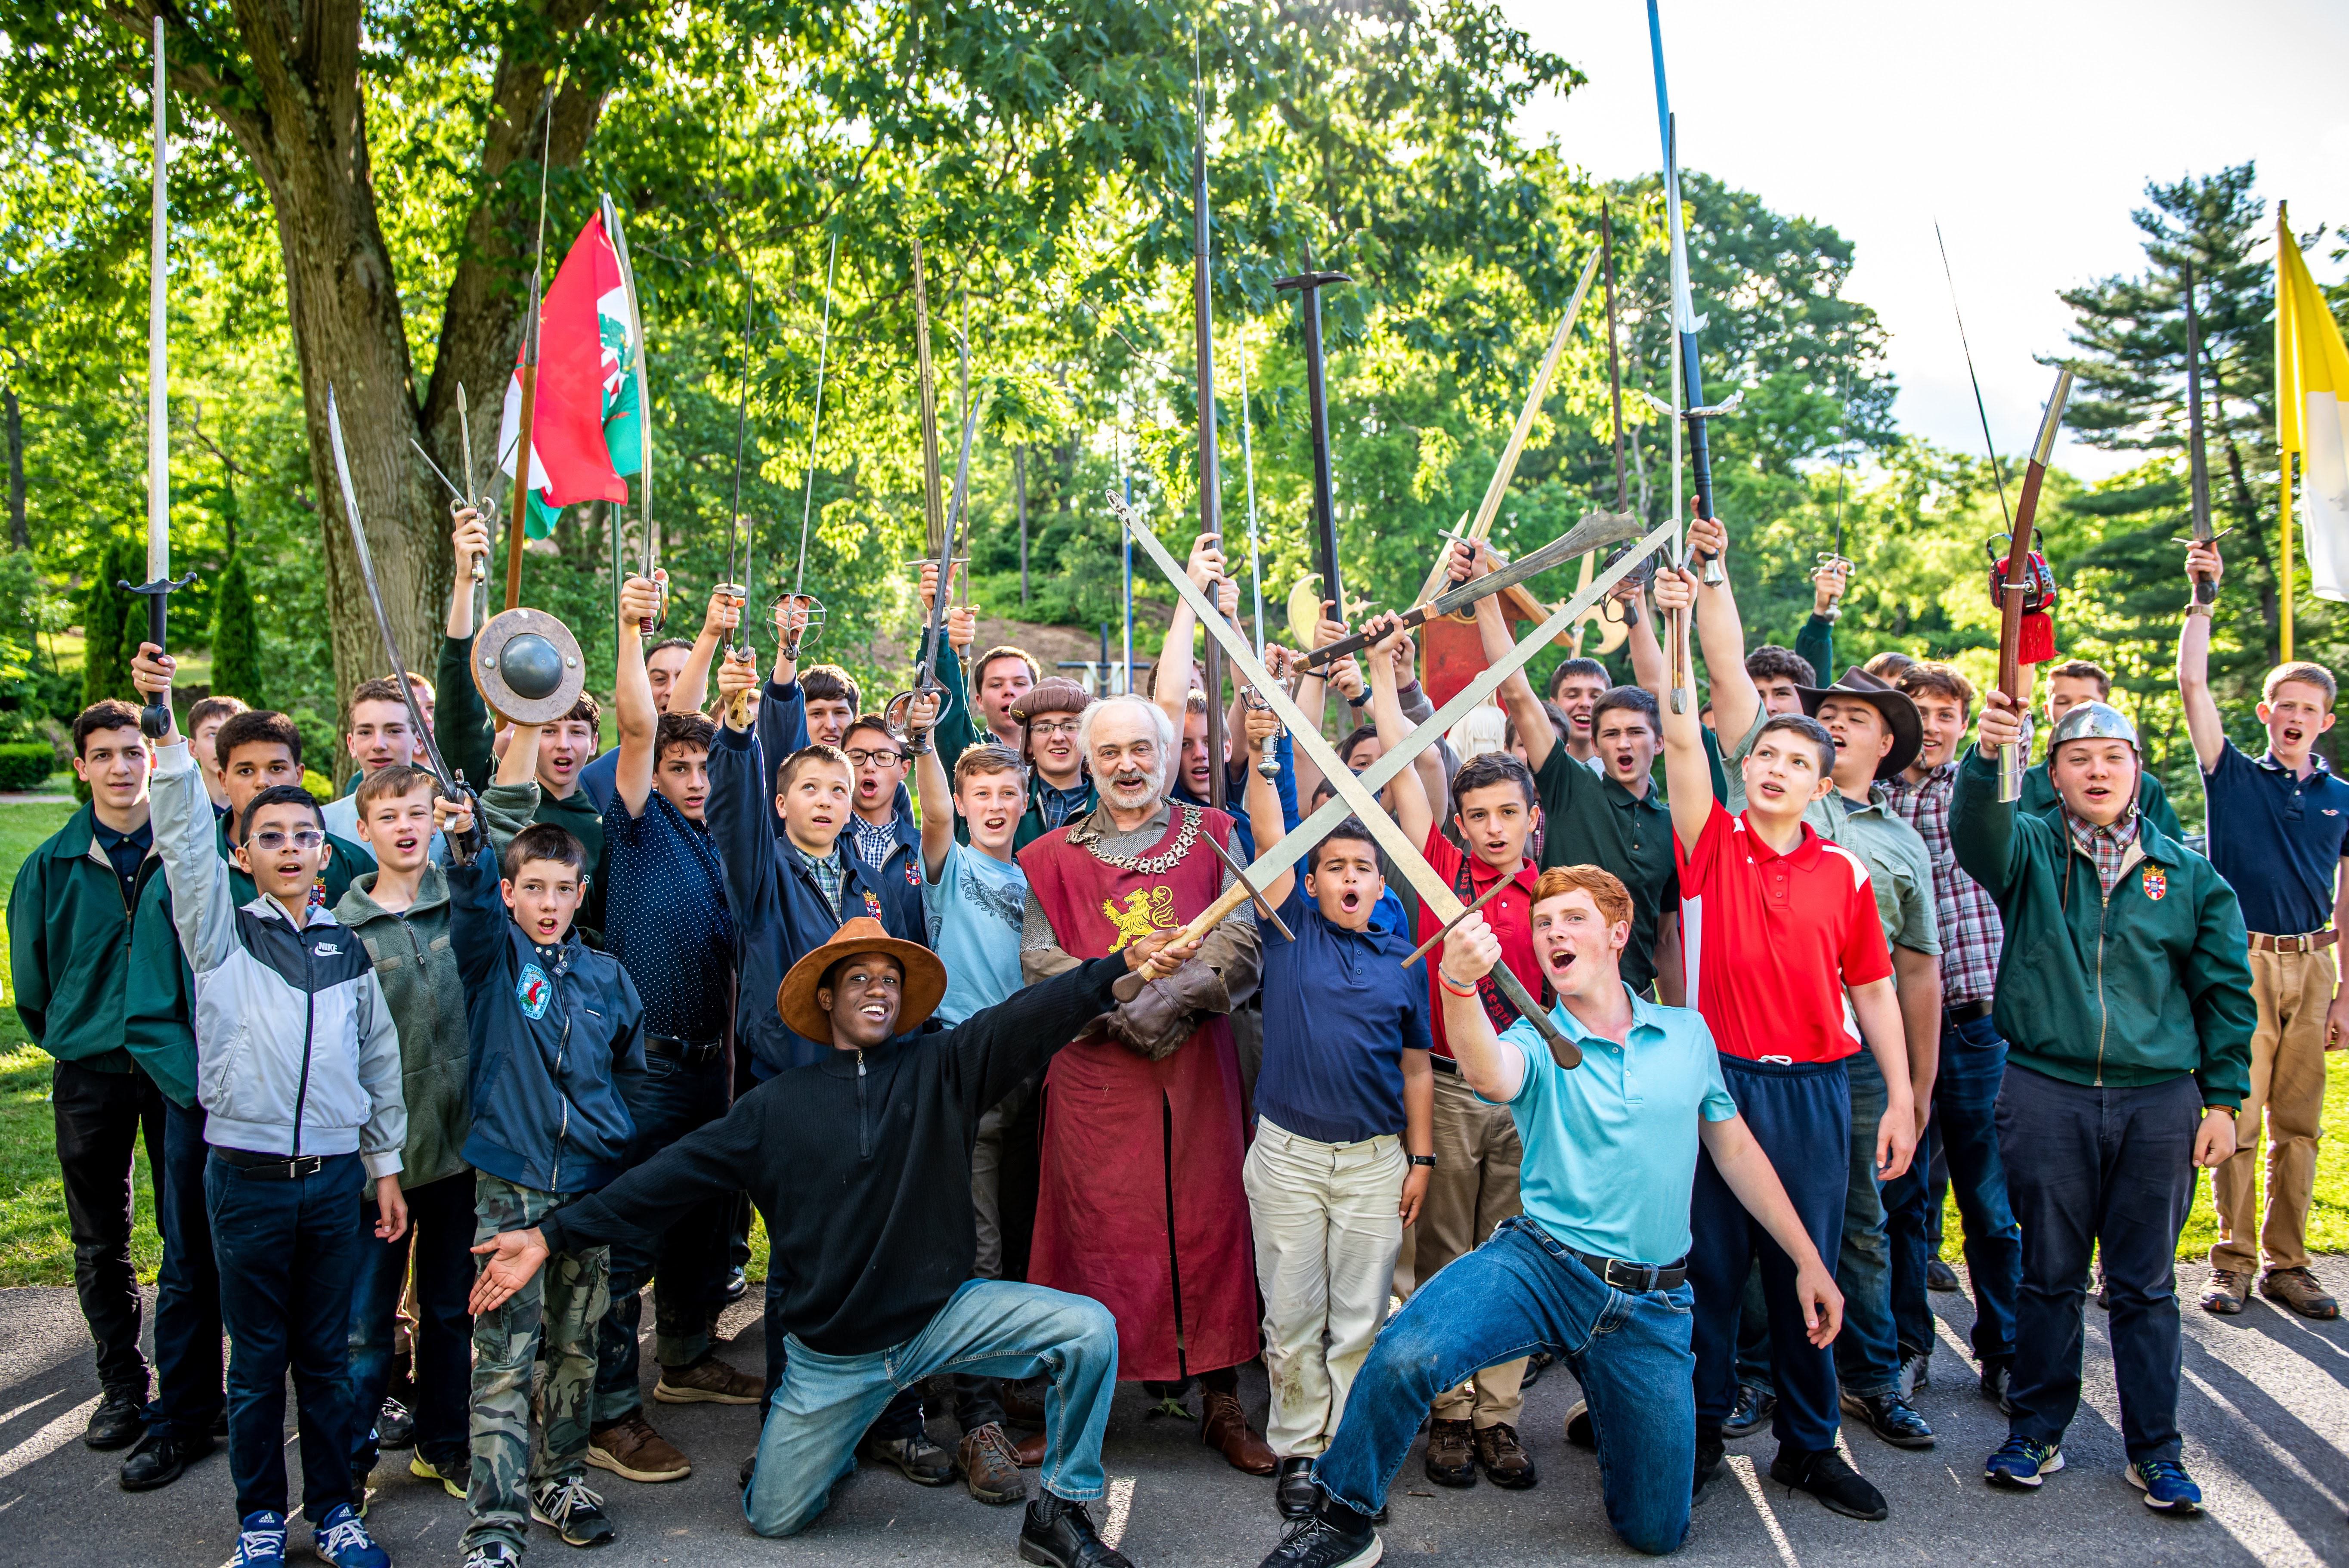 “For God, Honor  and Country!” Young Men Answer the Call to Chivalry at TFP Summer Camps